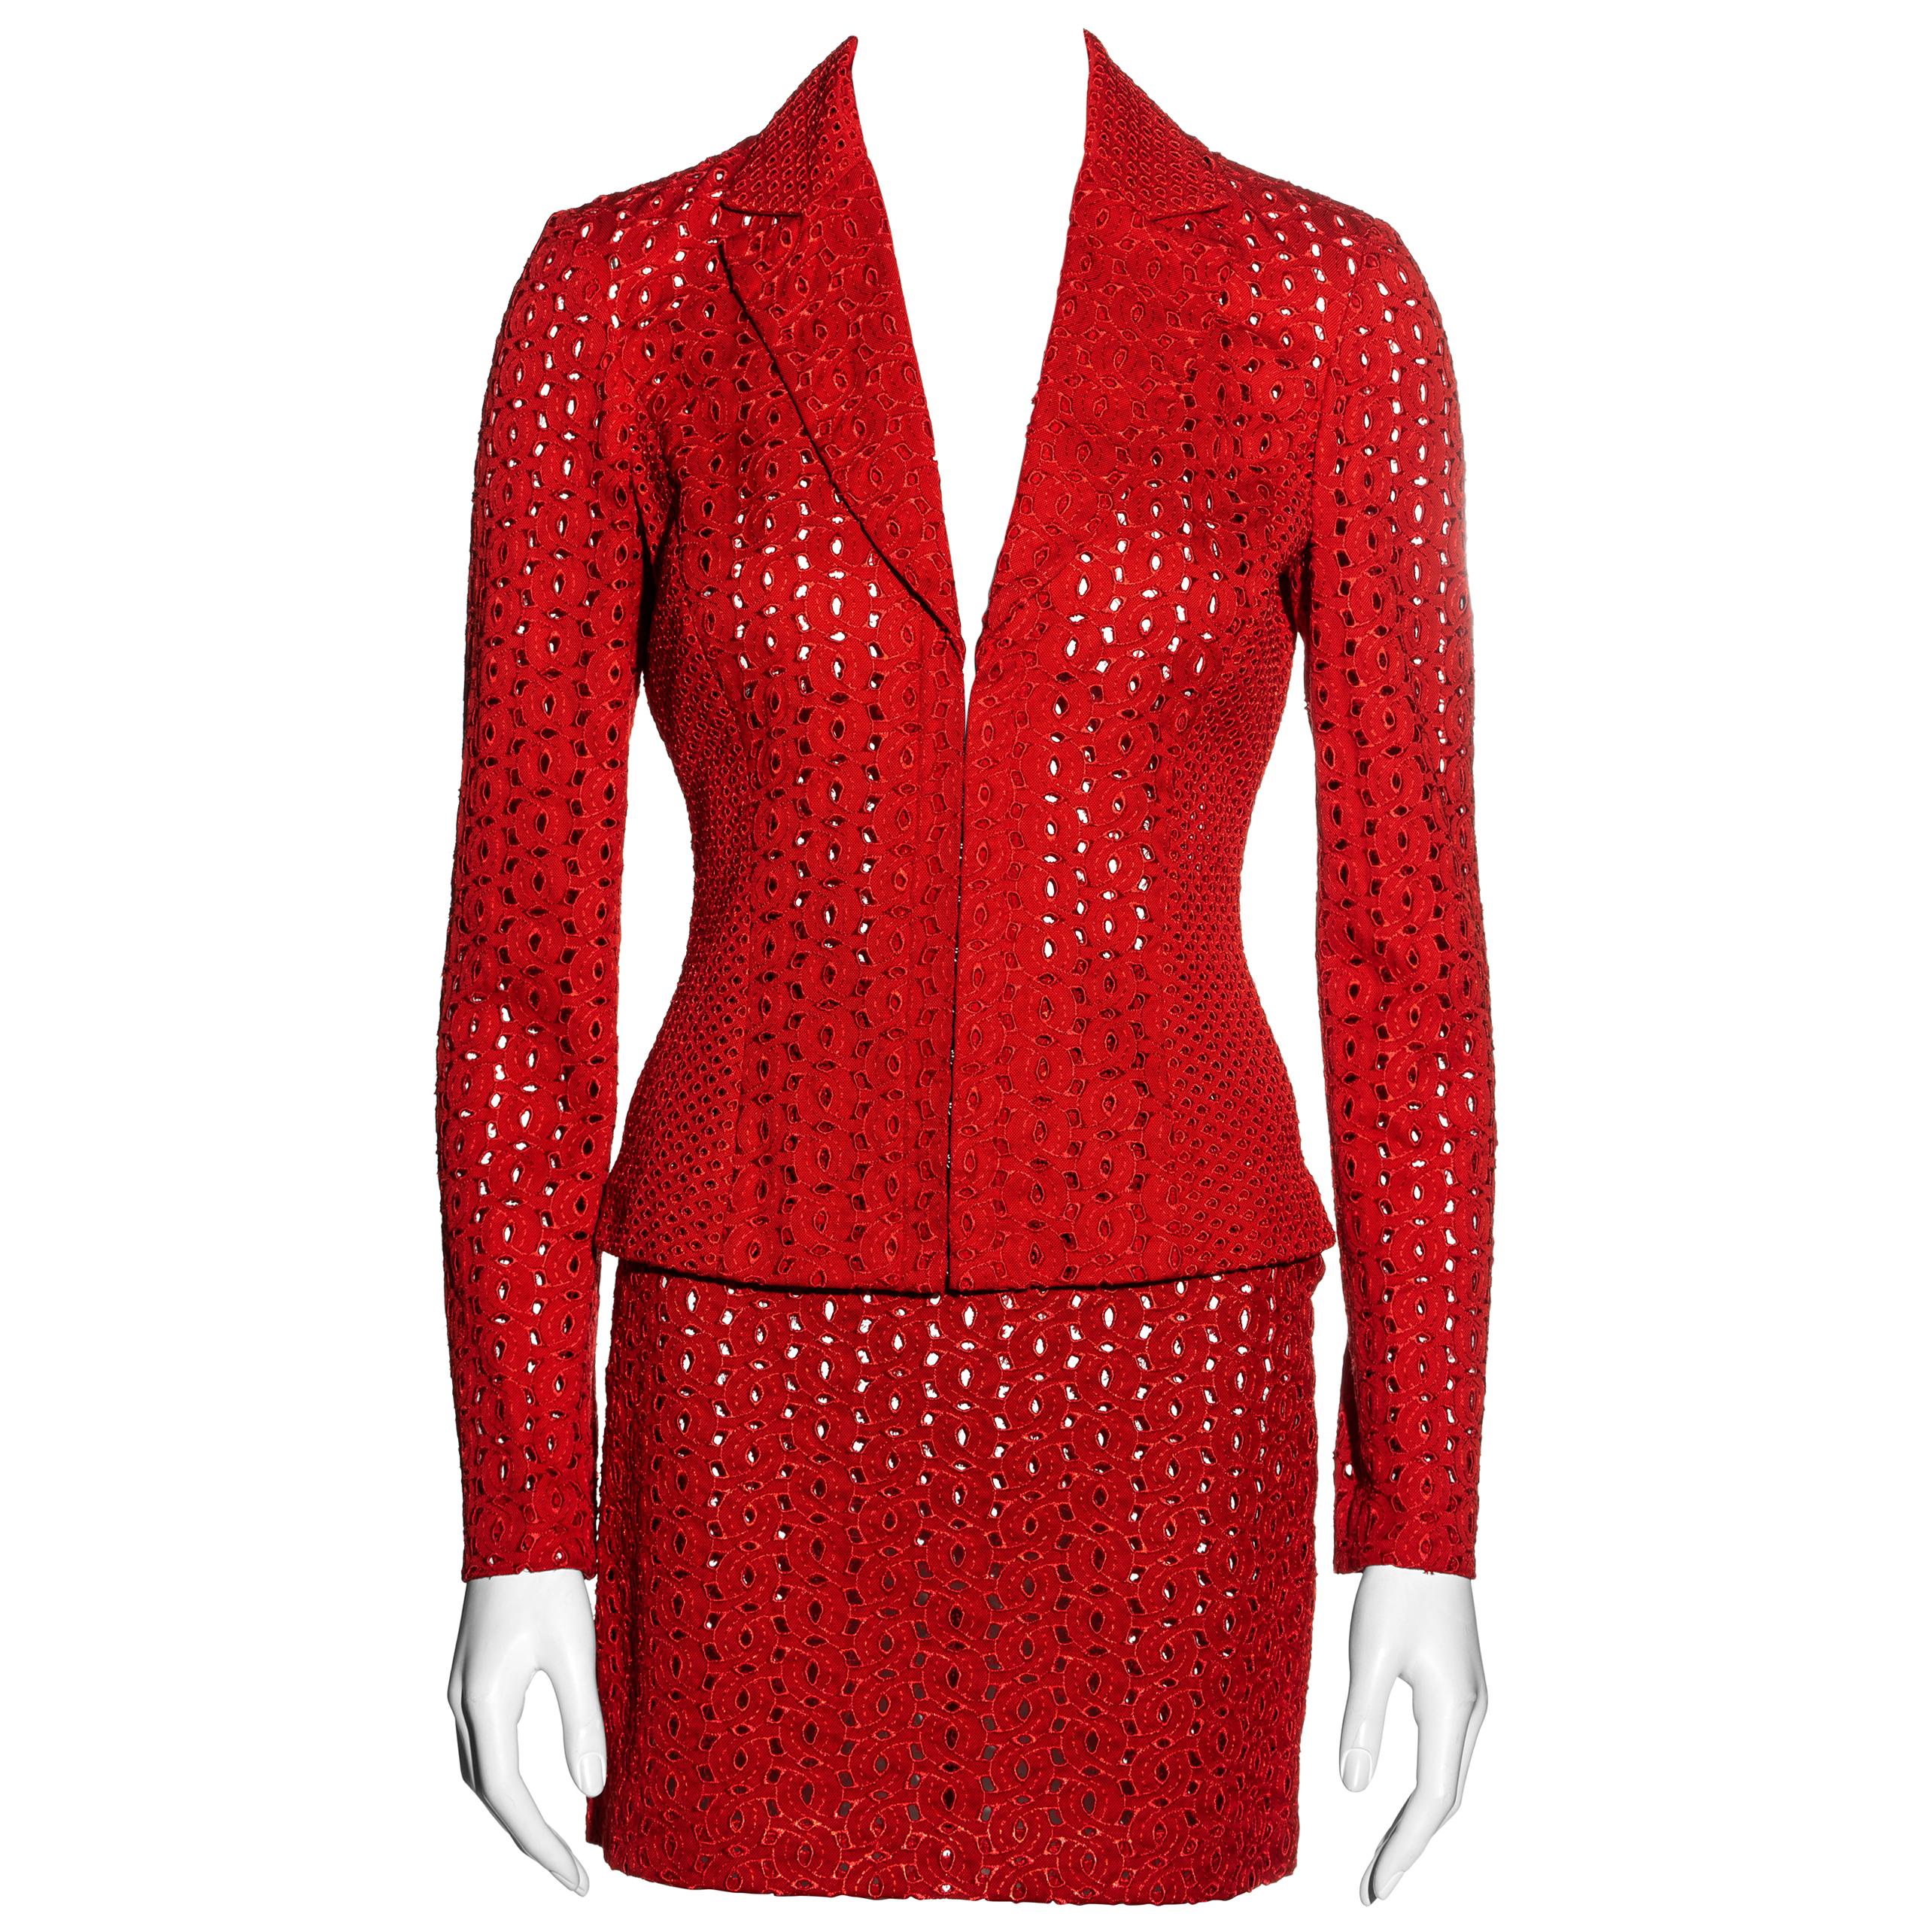 Gianni Versace red cotton cutwork mini skirt suit, ss 2002